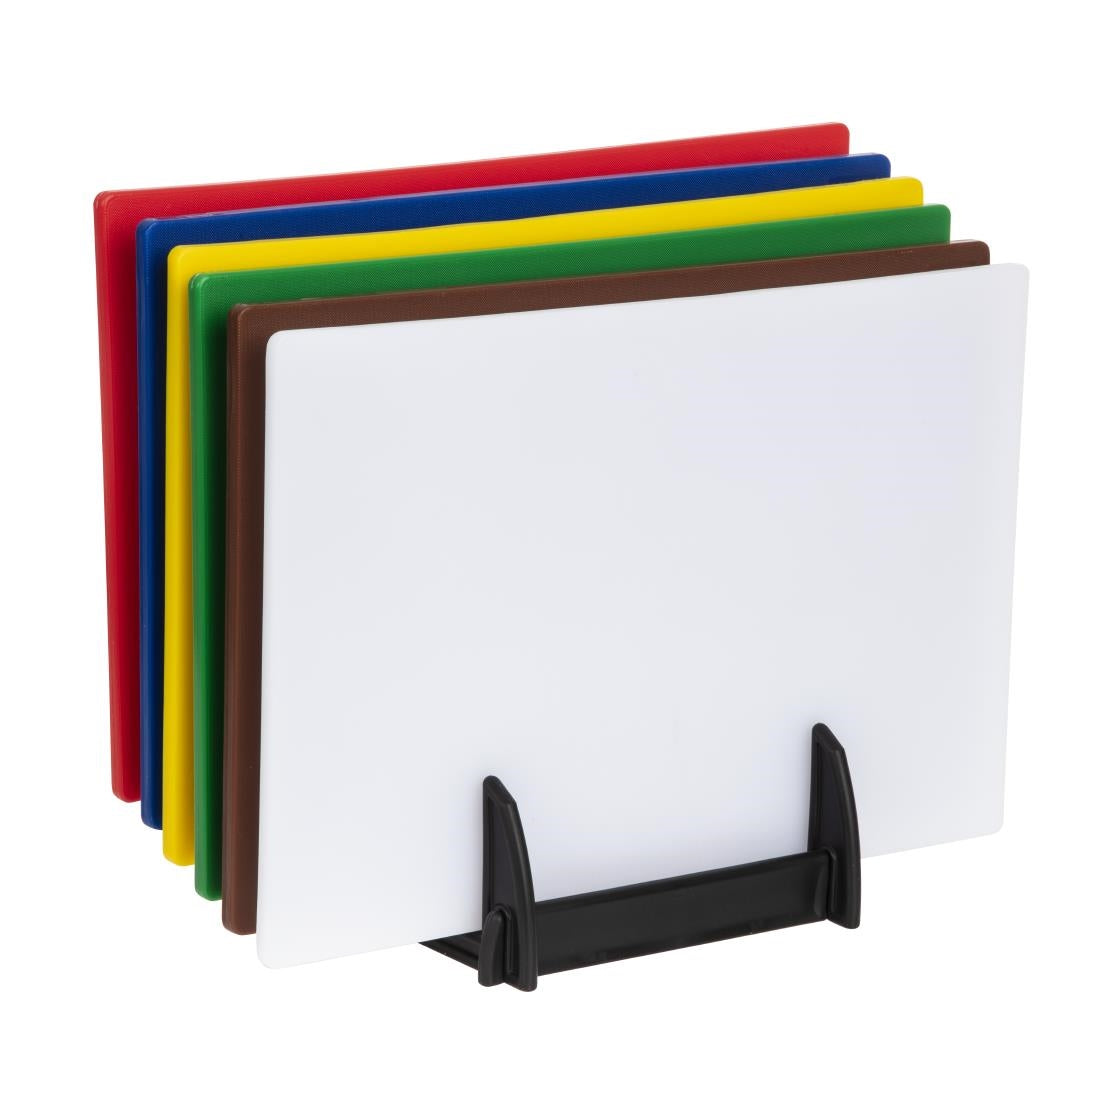 Hygiplas Low Density Chopping Board Set with Rack JD Catering Equipment Solutions Ltd